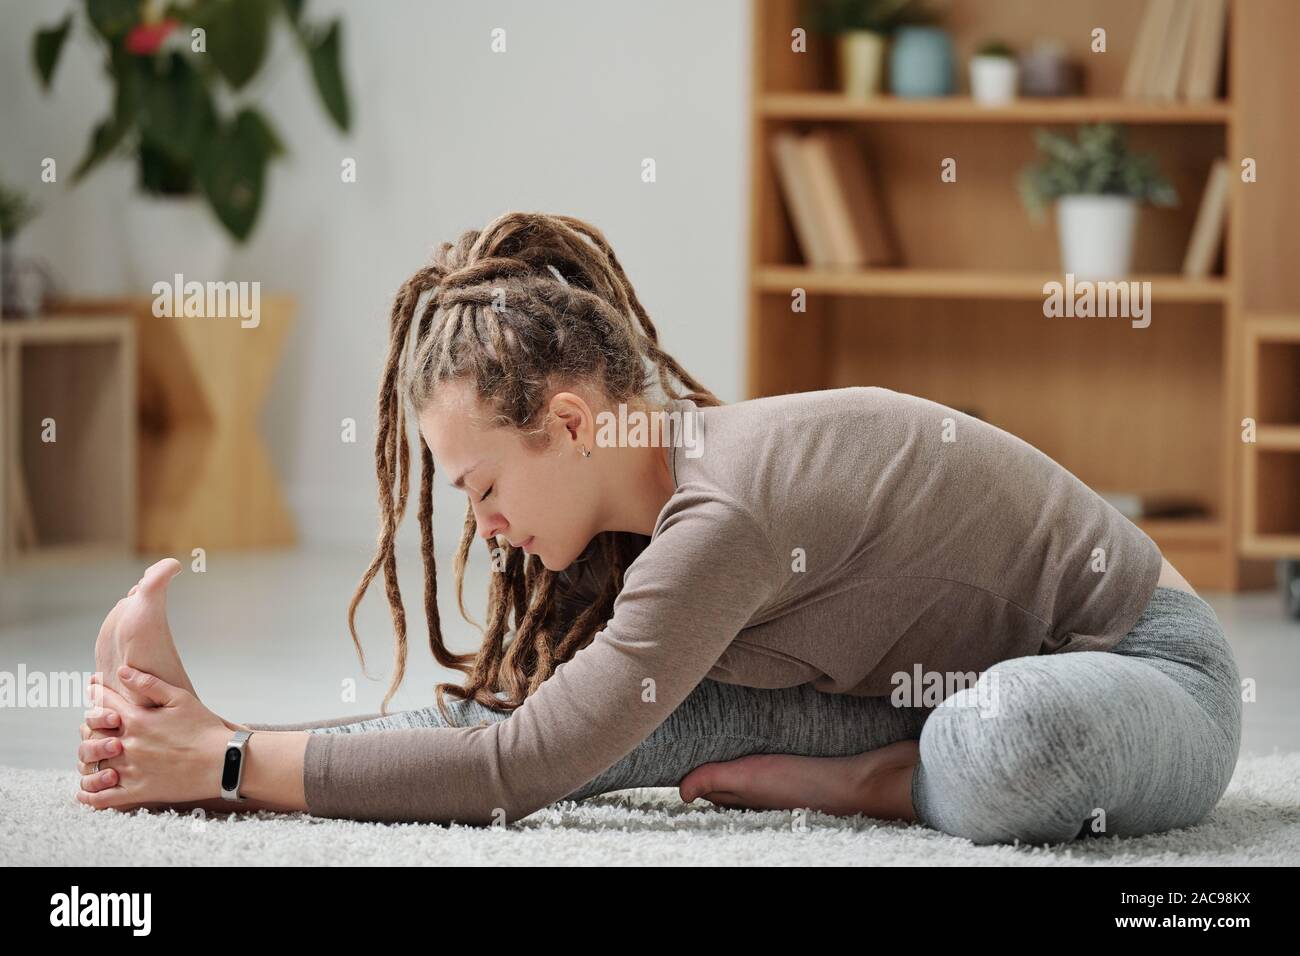 Young flexible woman in activewear sitting on the floor and stretching one leg Stock Photo